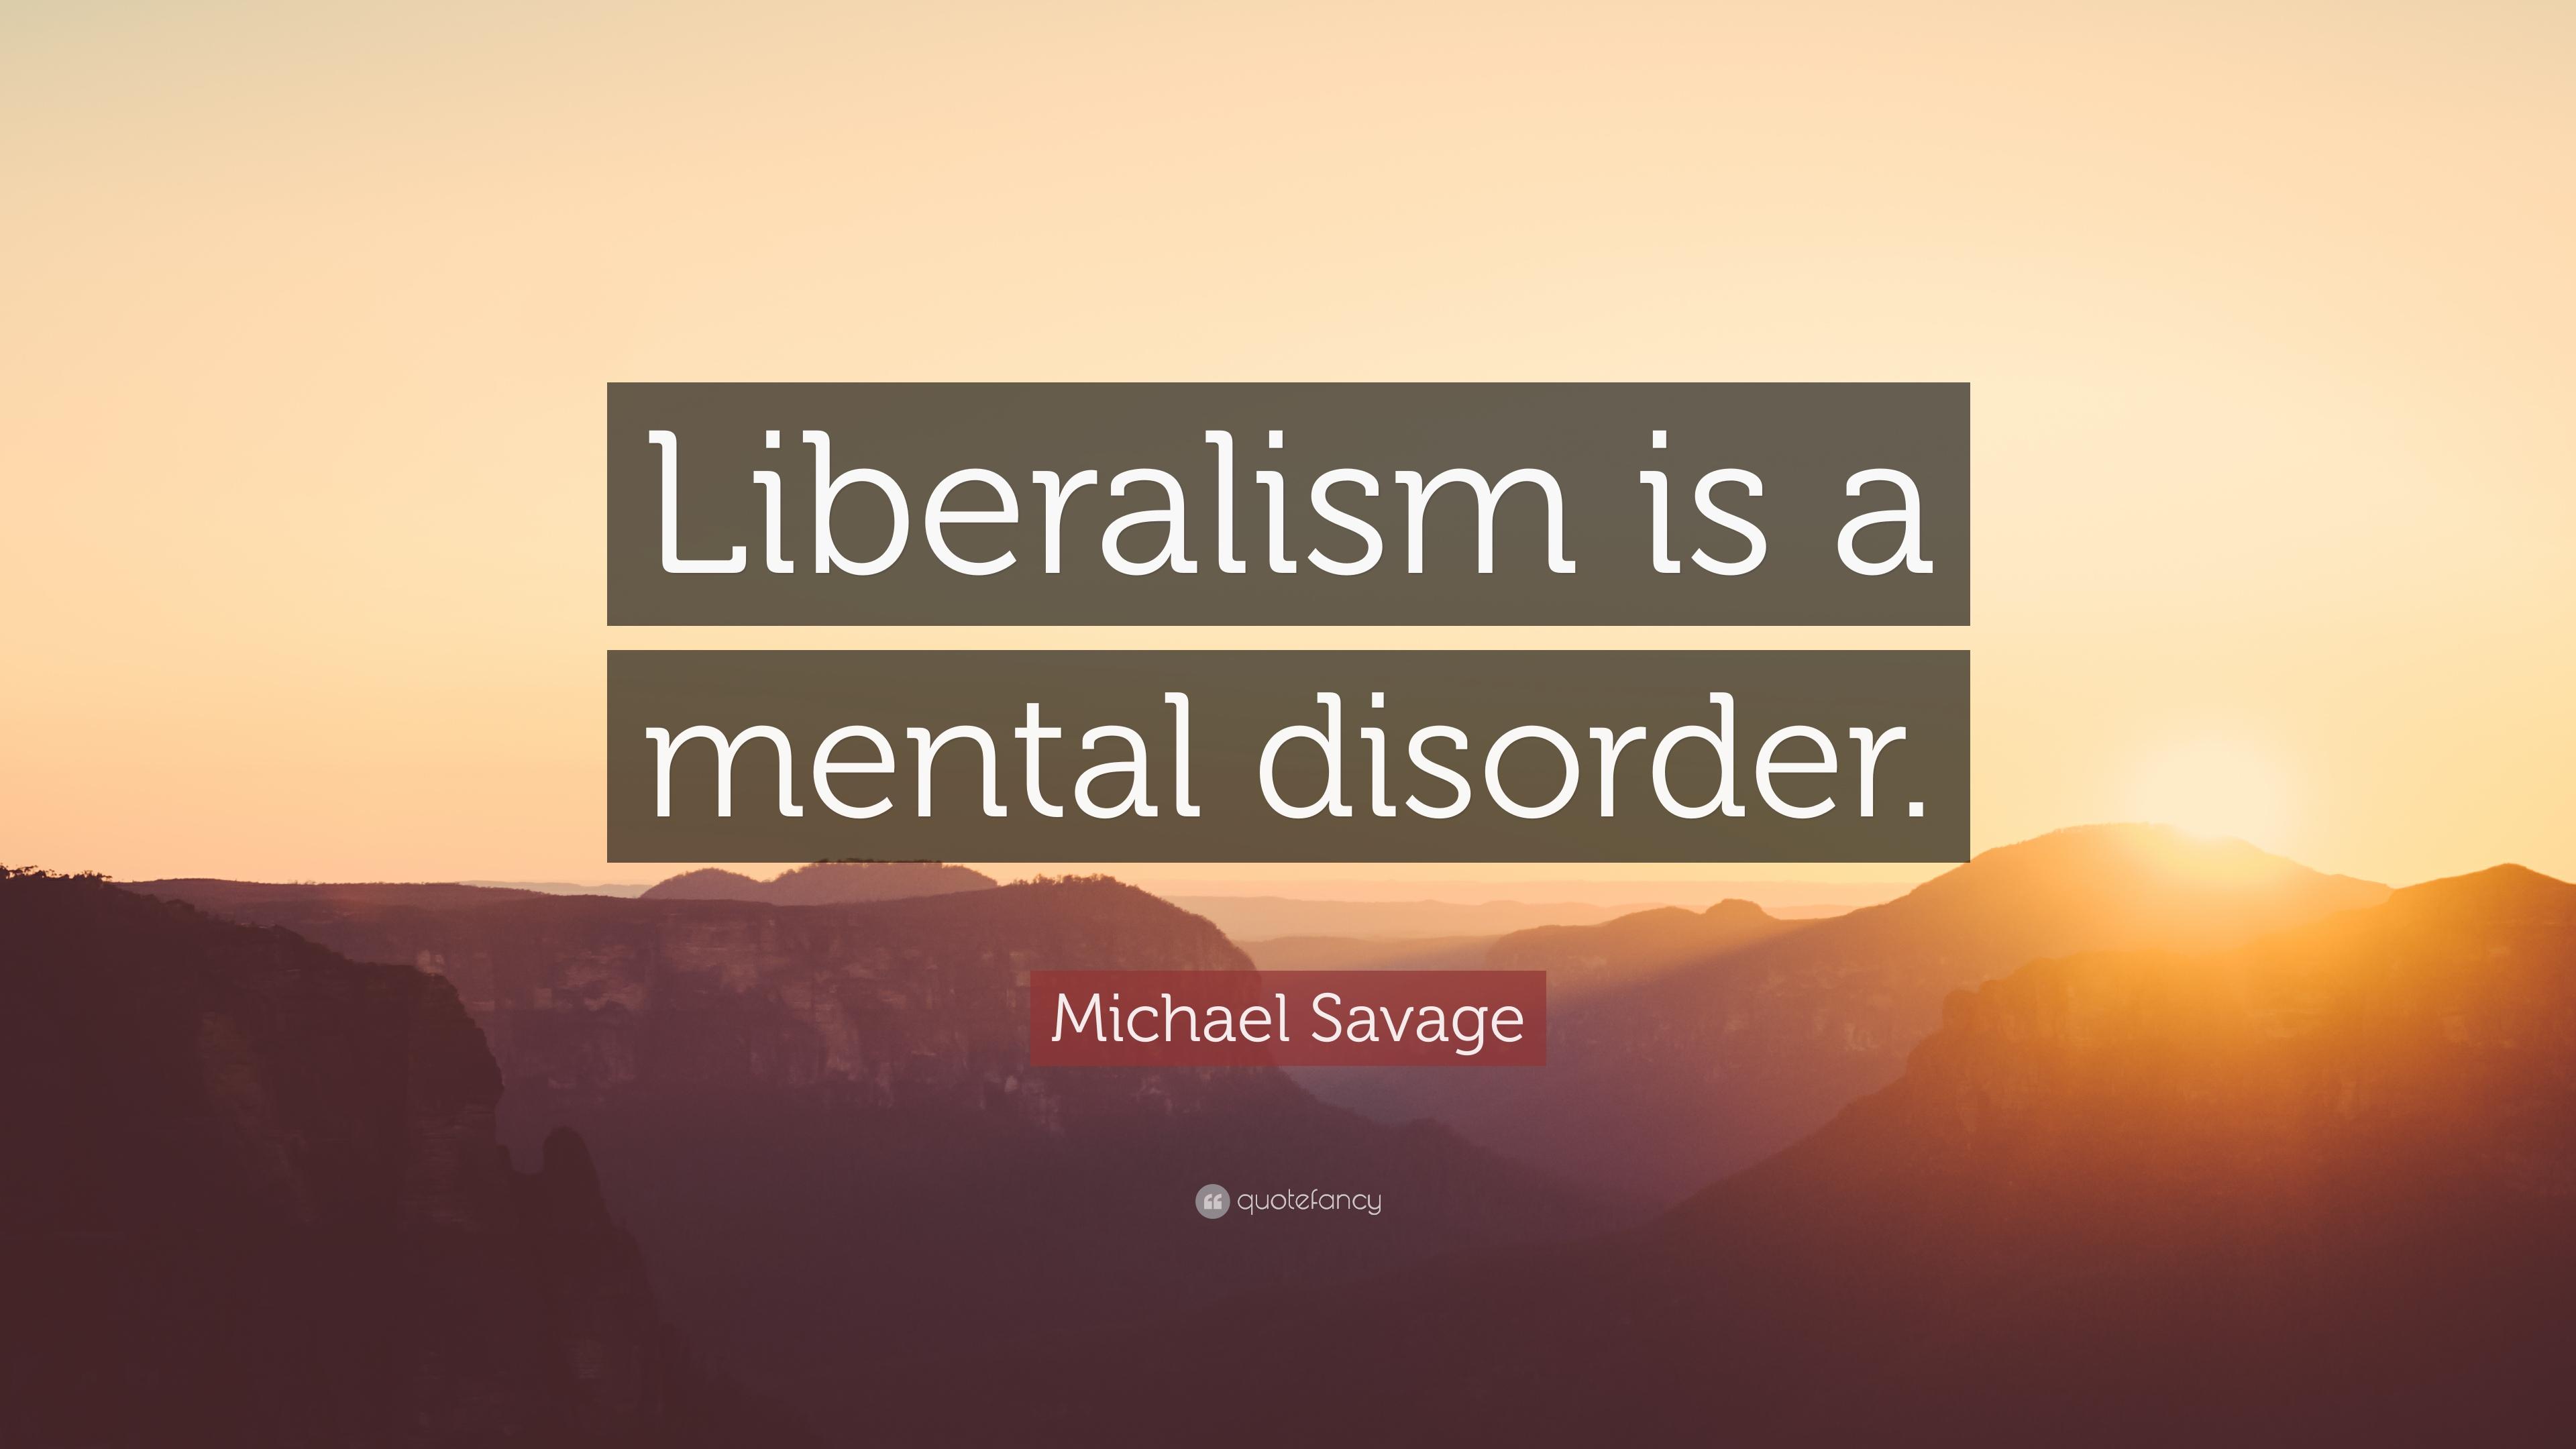 Michael Savage Quote: “Liberalism is a mental disorder.” 9